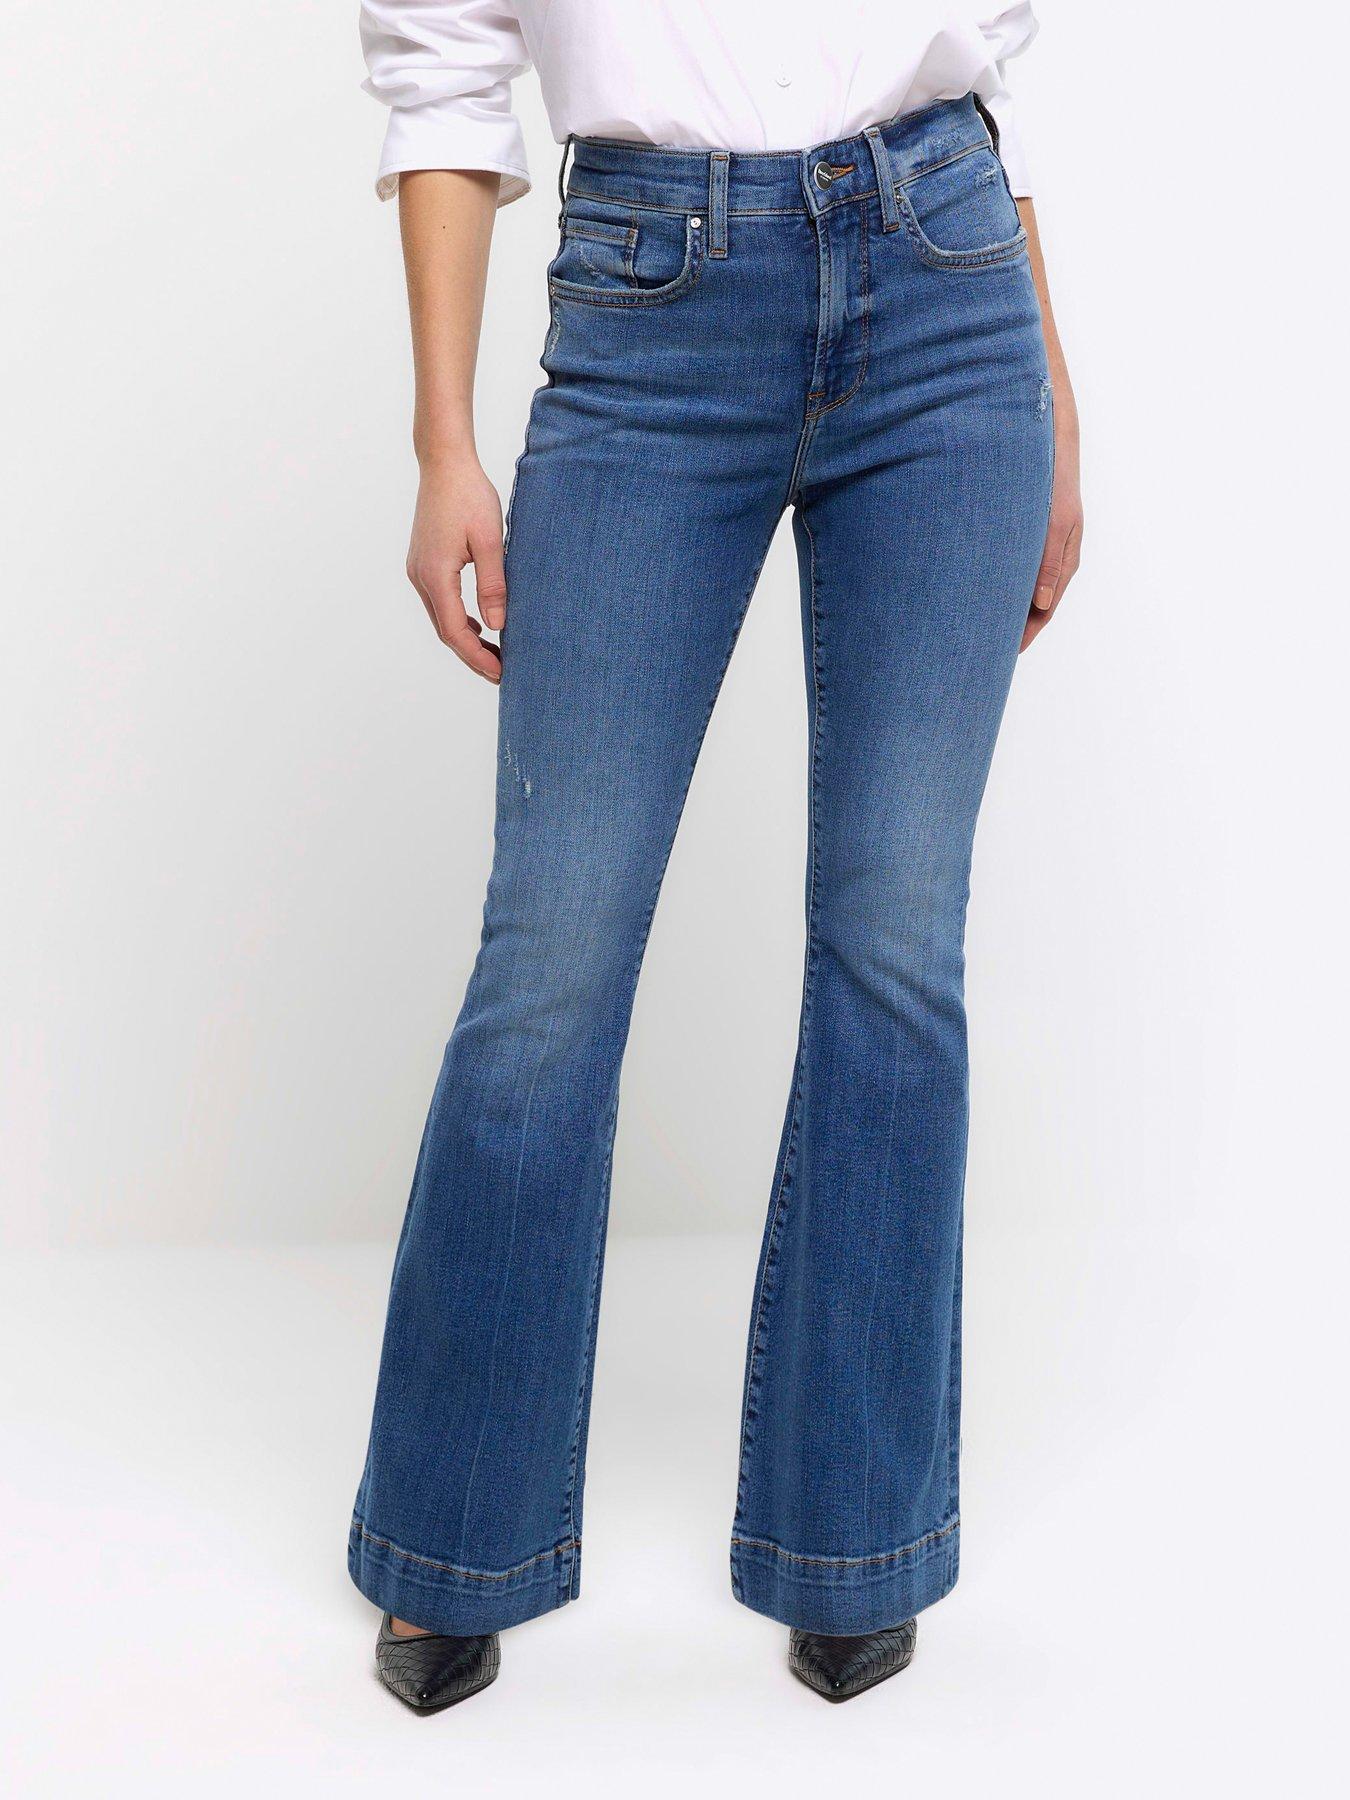 Shop Women's Flared Jeans, Ladies Flares